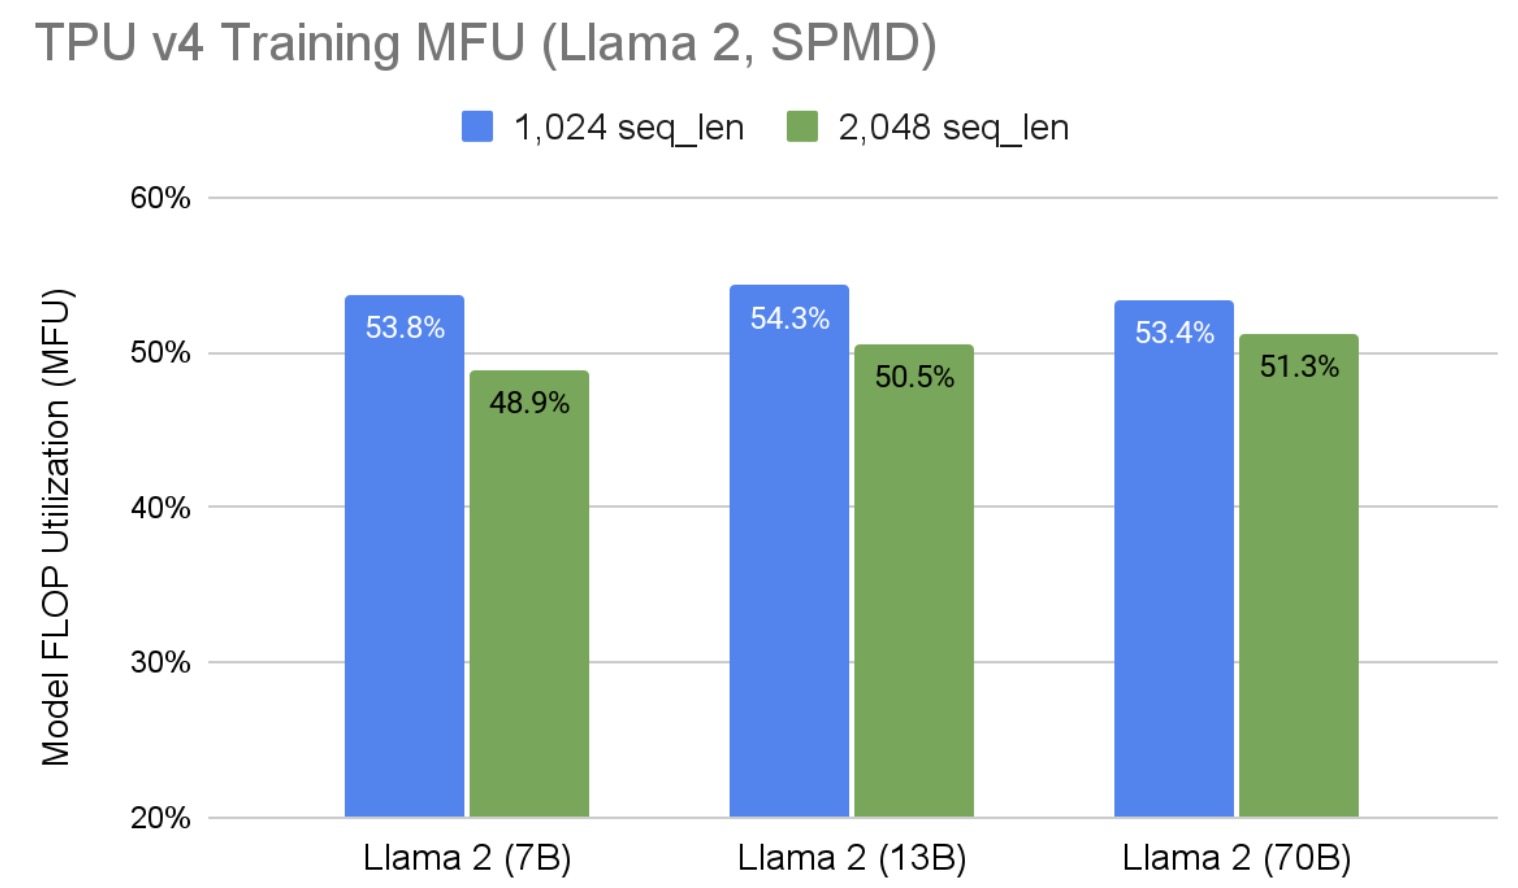 Figure 2. Llama 2 SPMD Training MFU on TPU v4 with Different Sequence Lengths